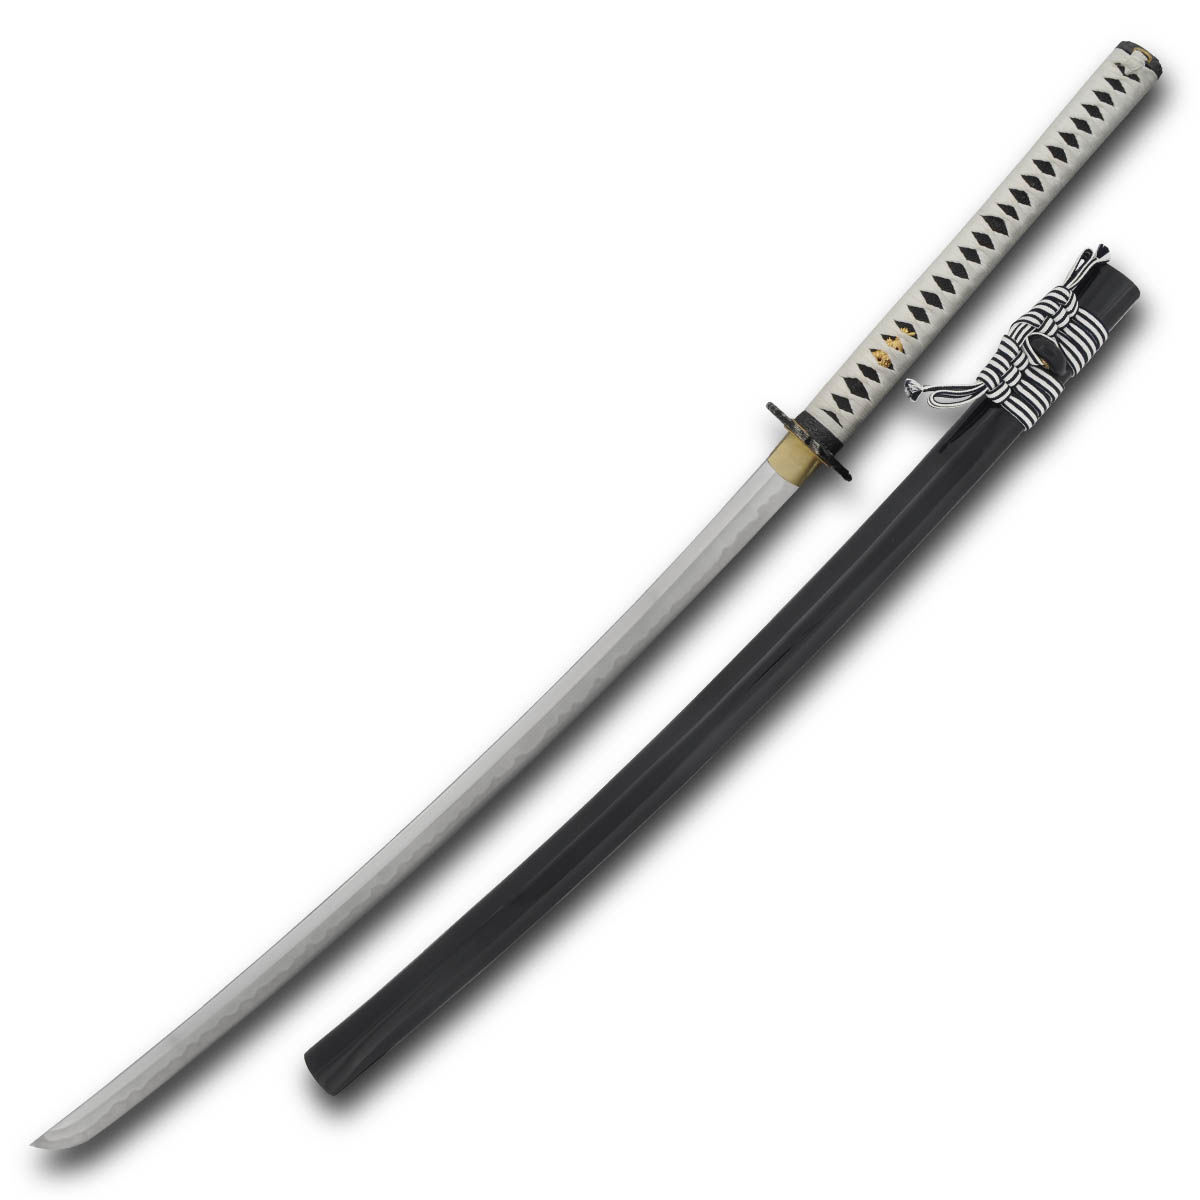 Koi Katana has hand-forged T10 high-carbon steel blade and black lacquered saya with black and white striped cotton sageo